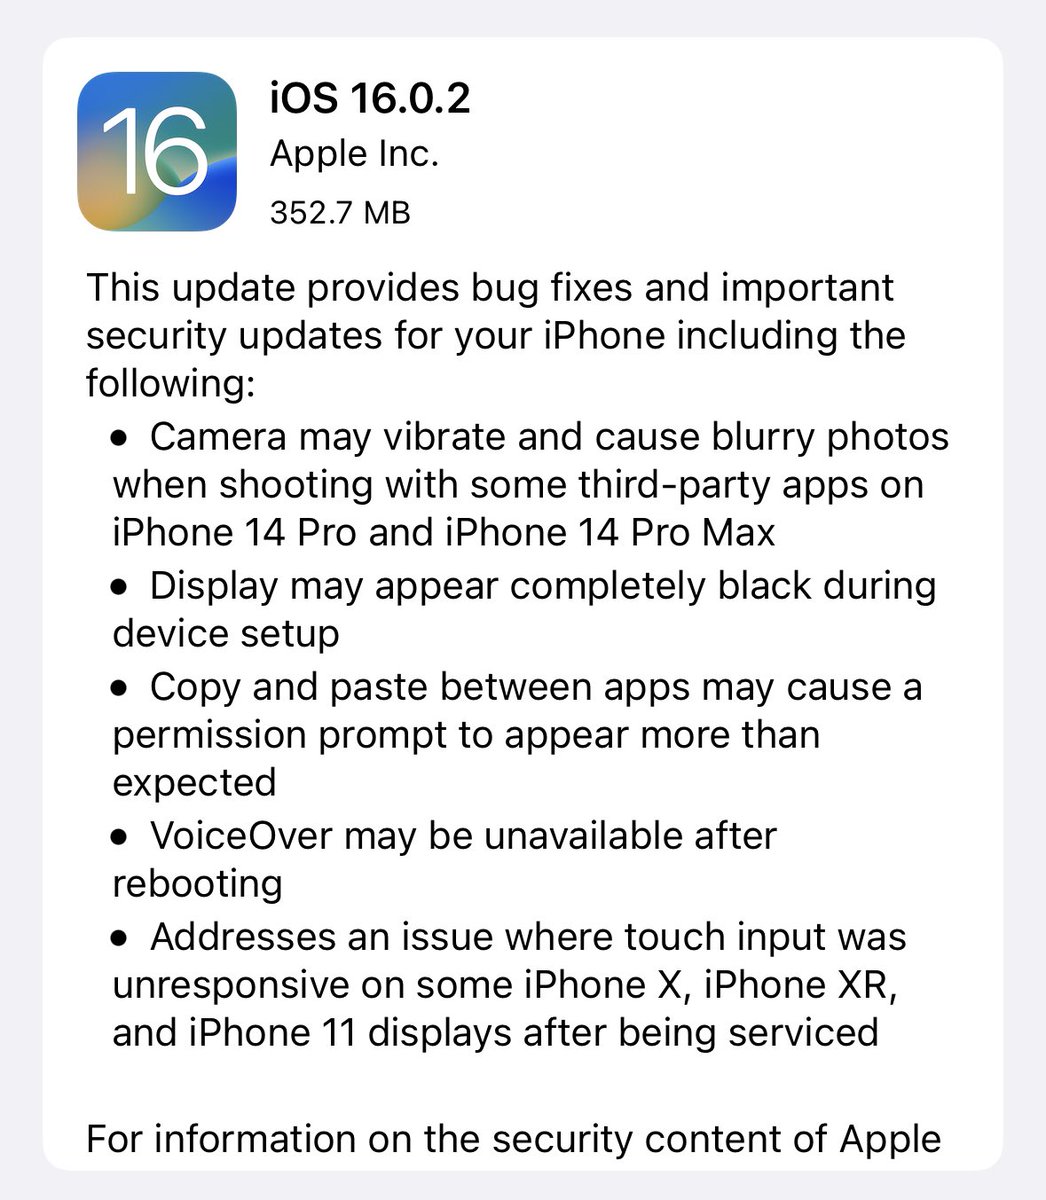 Great to see such fast updates to iOS 16. Fixes that Paste bug!